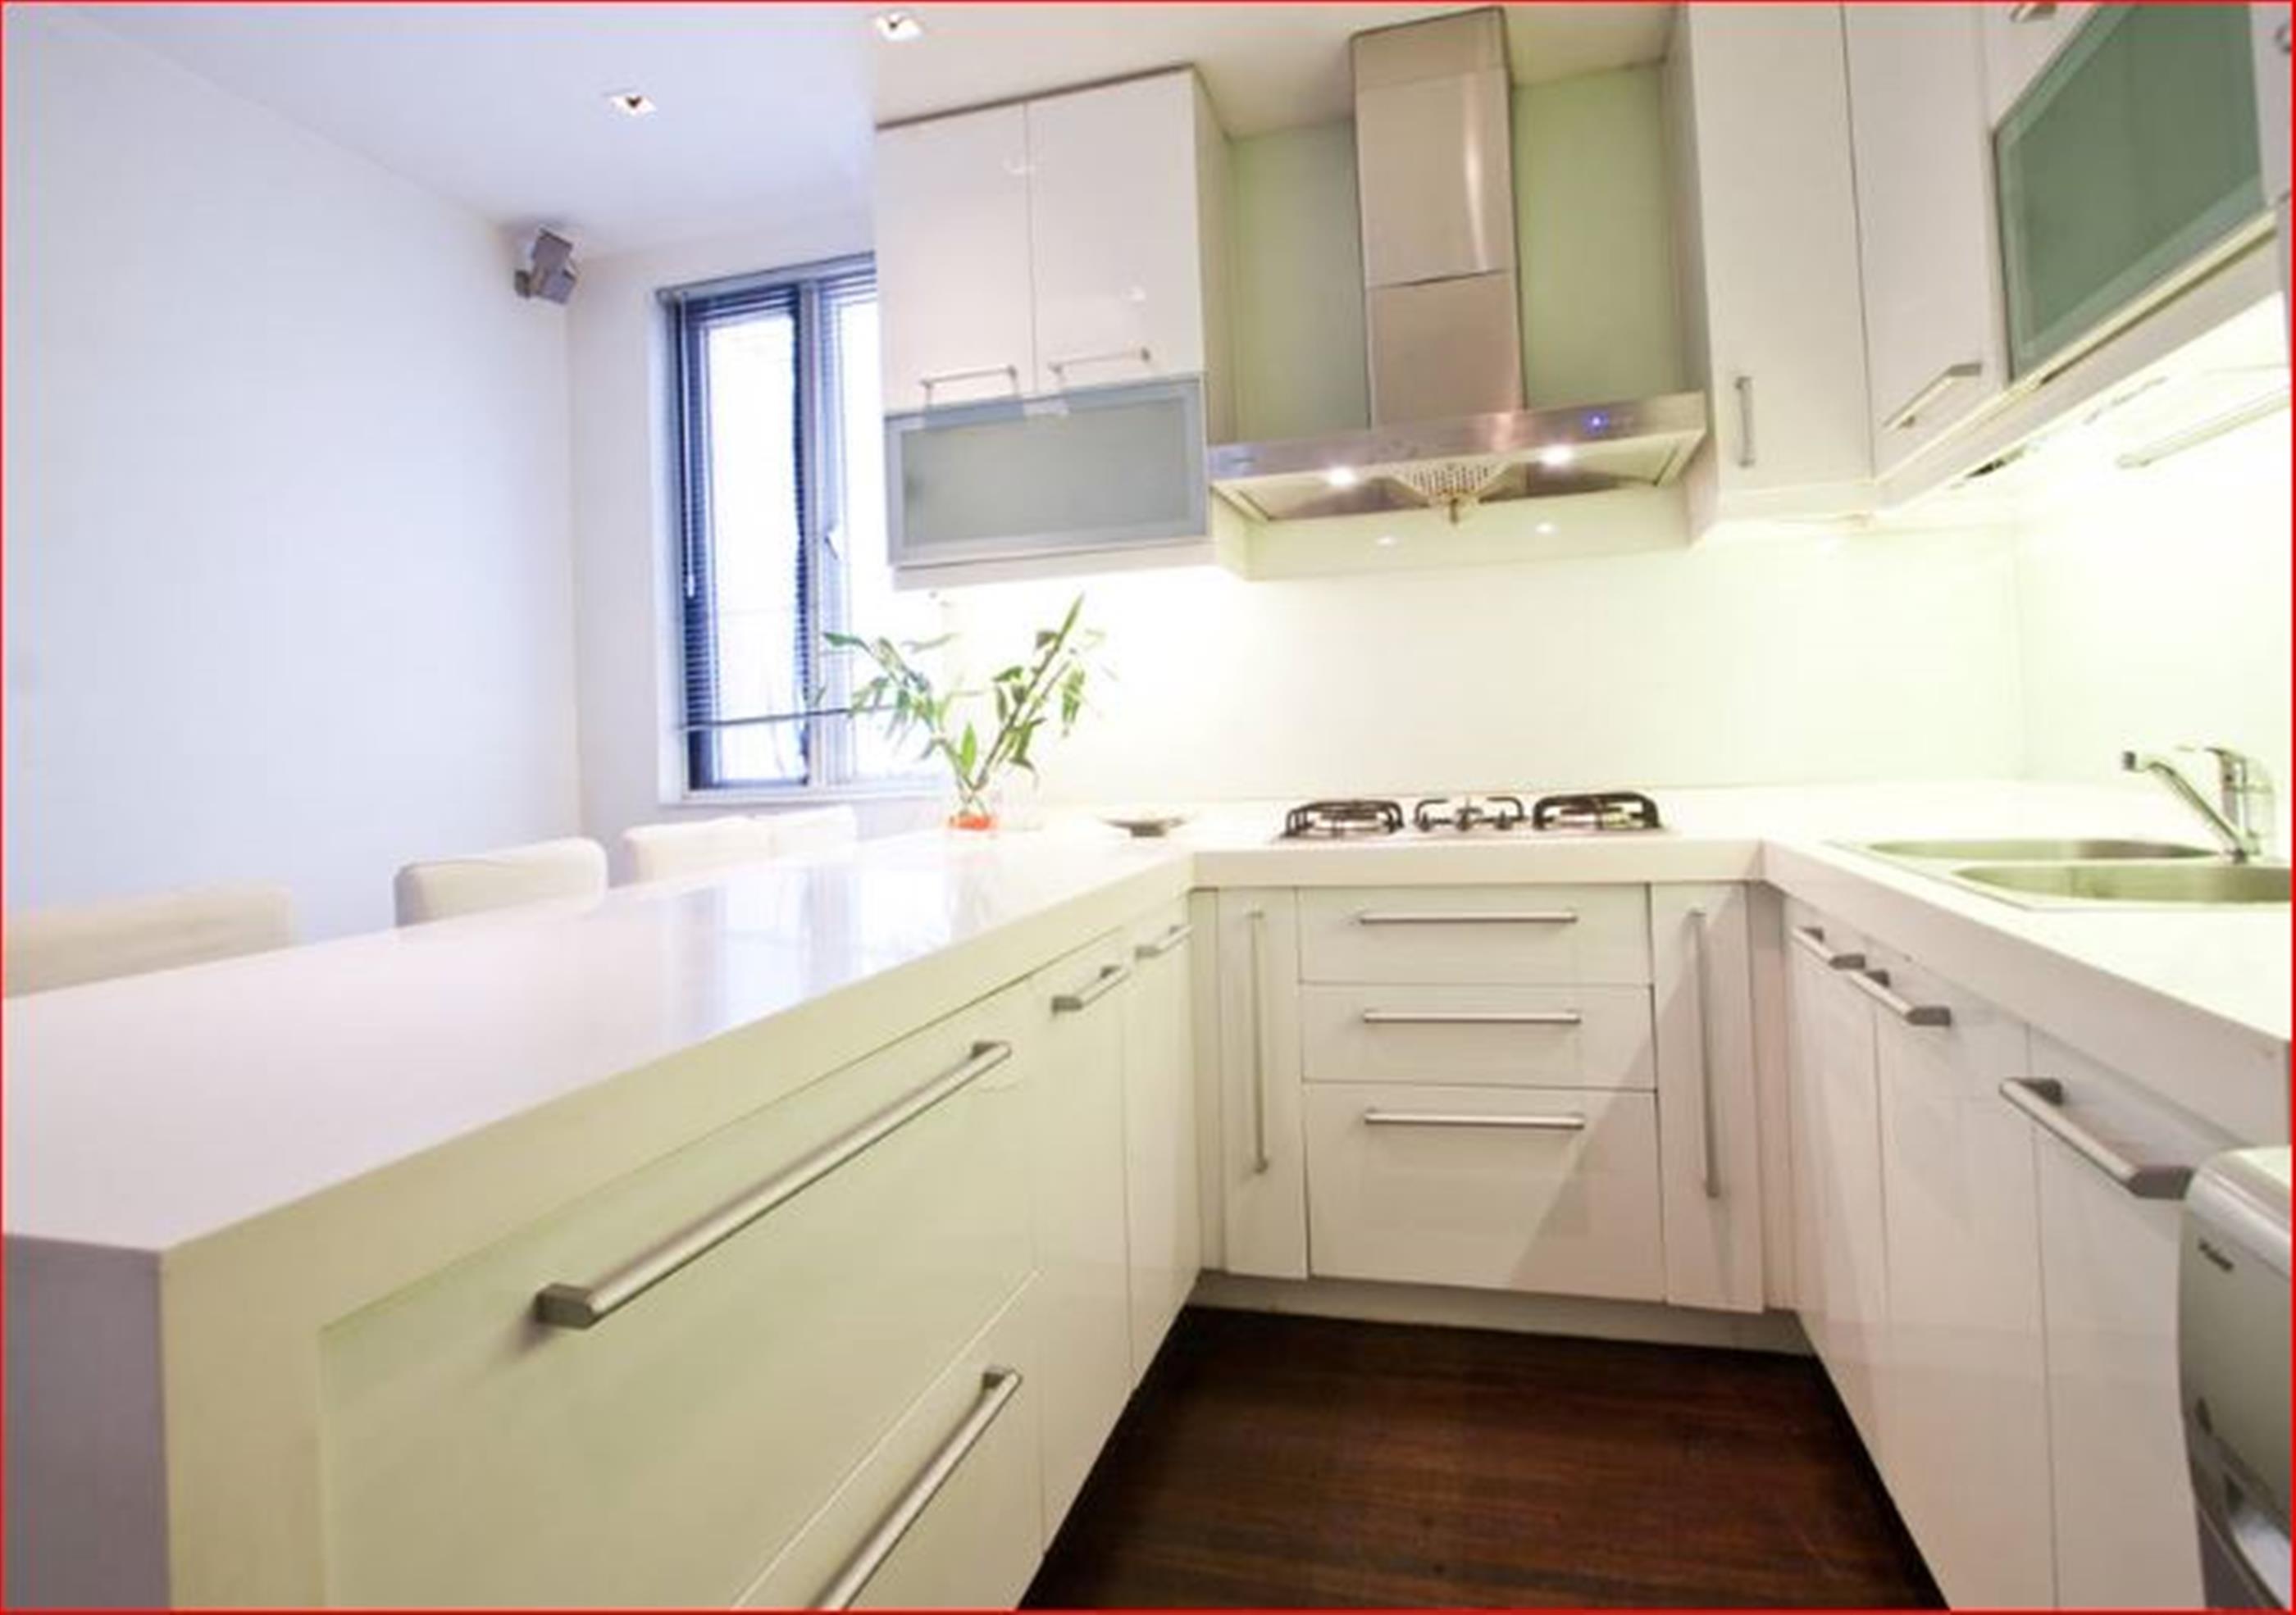 modern kitchen Renovated Bright Spacious Modern FFC 1BR Apt nr LN1/2/7/10/11 in Shanghai for Rent